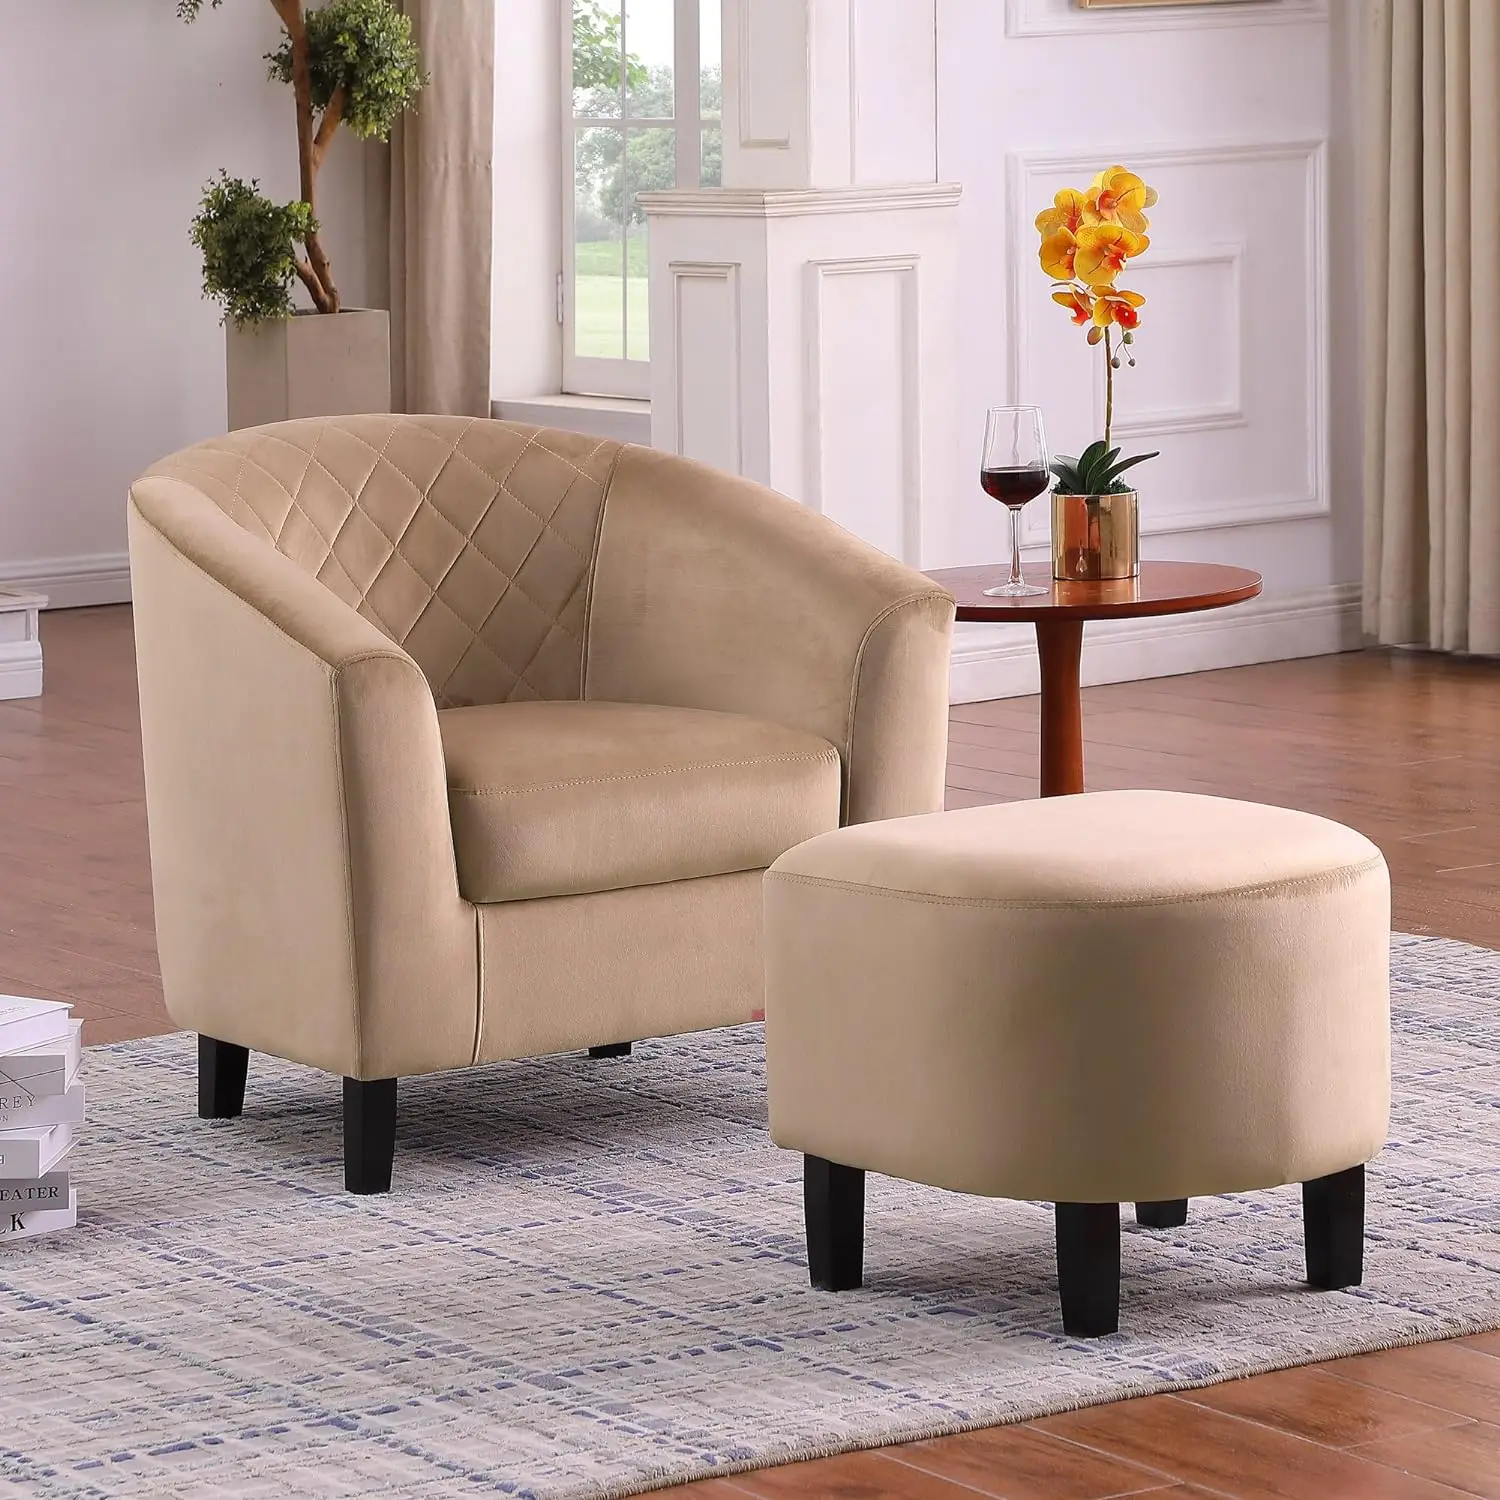 

Wesley Upholstered Mid-Century Modern Accent Tub Club Arm Chair with Matching Ottoman, Small Spaces, Living Room, Velvet